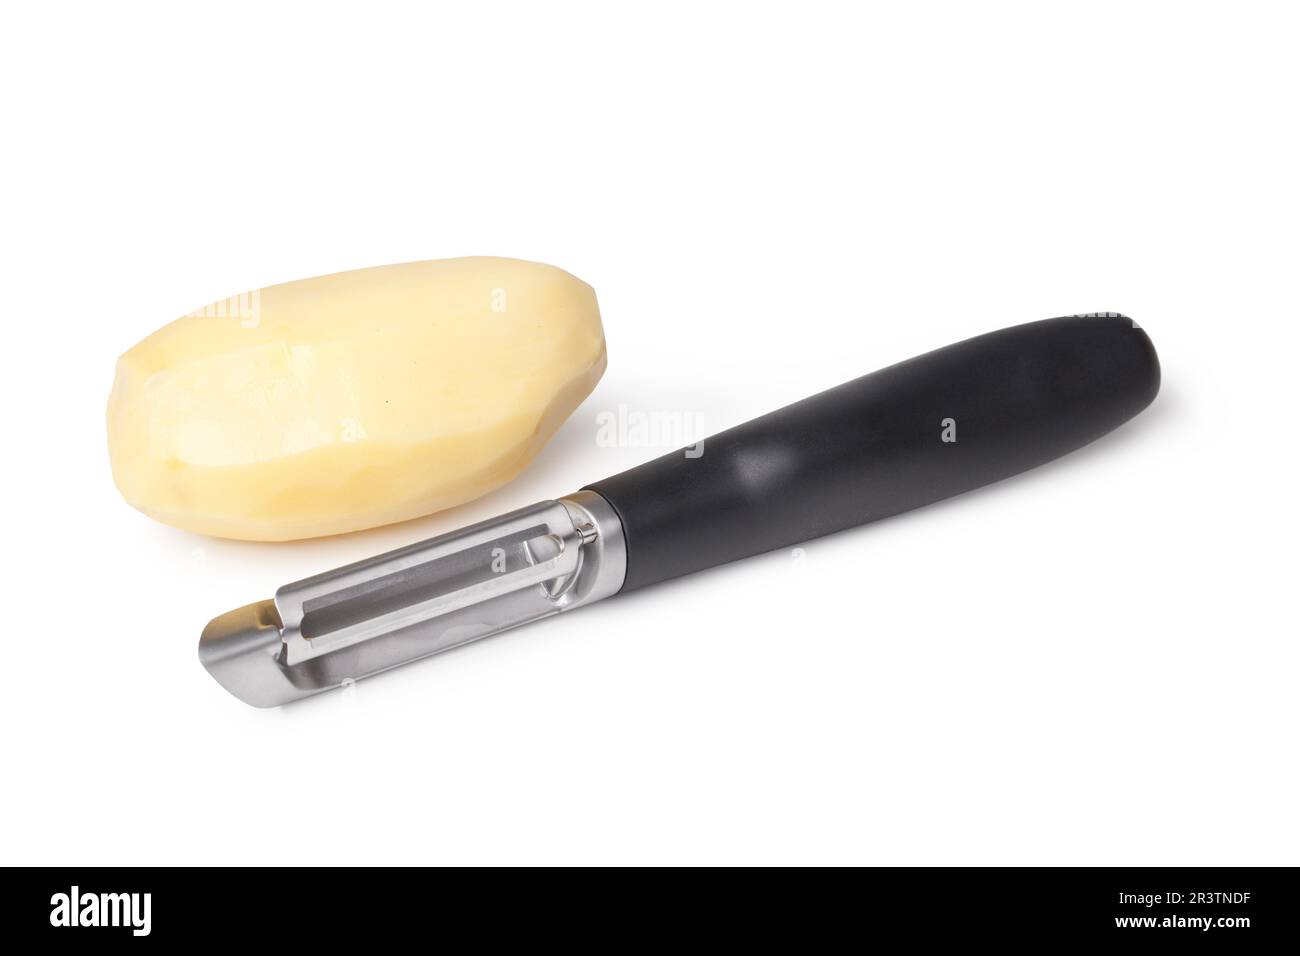 An Electric Potato Peeler On A White Surface Photograph by Jalag